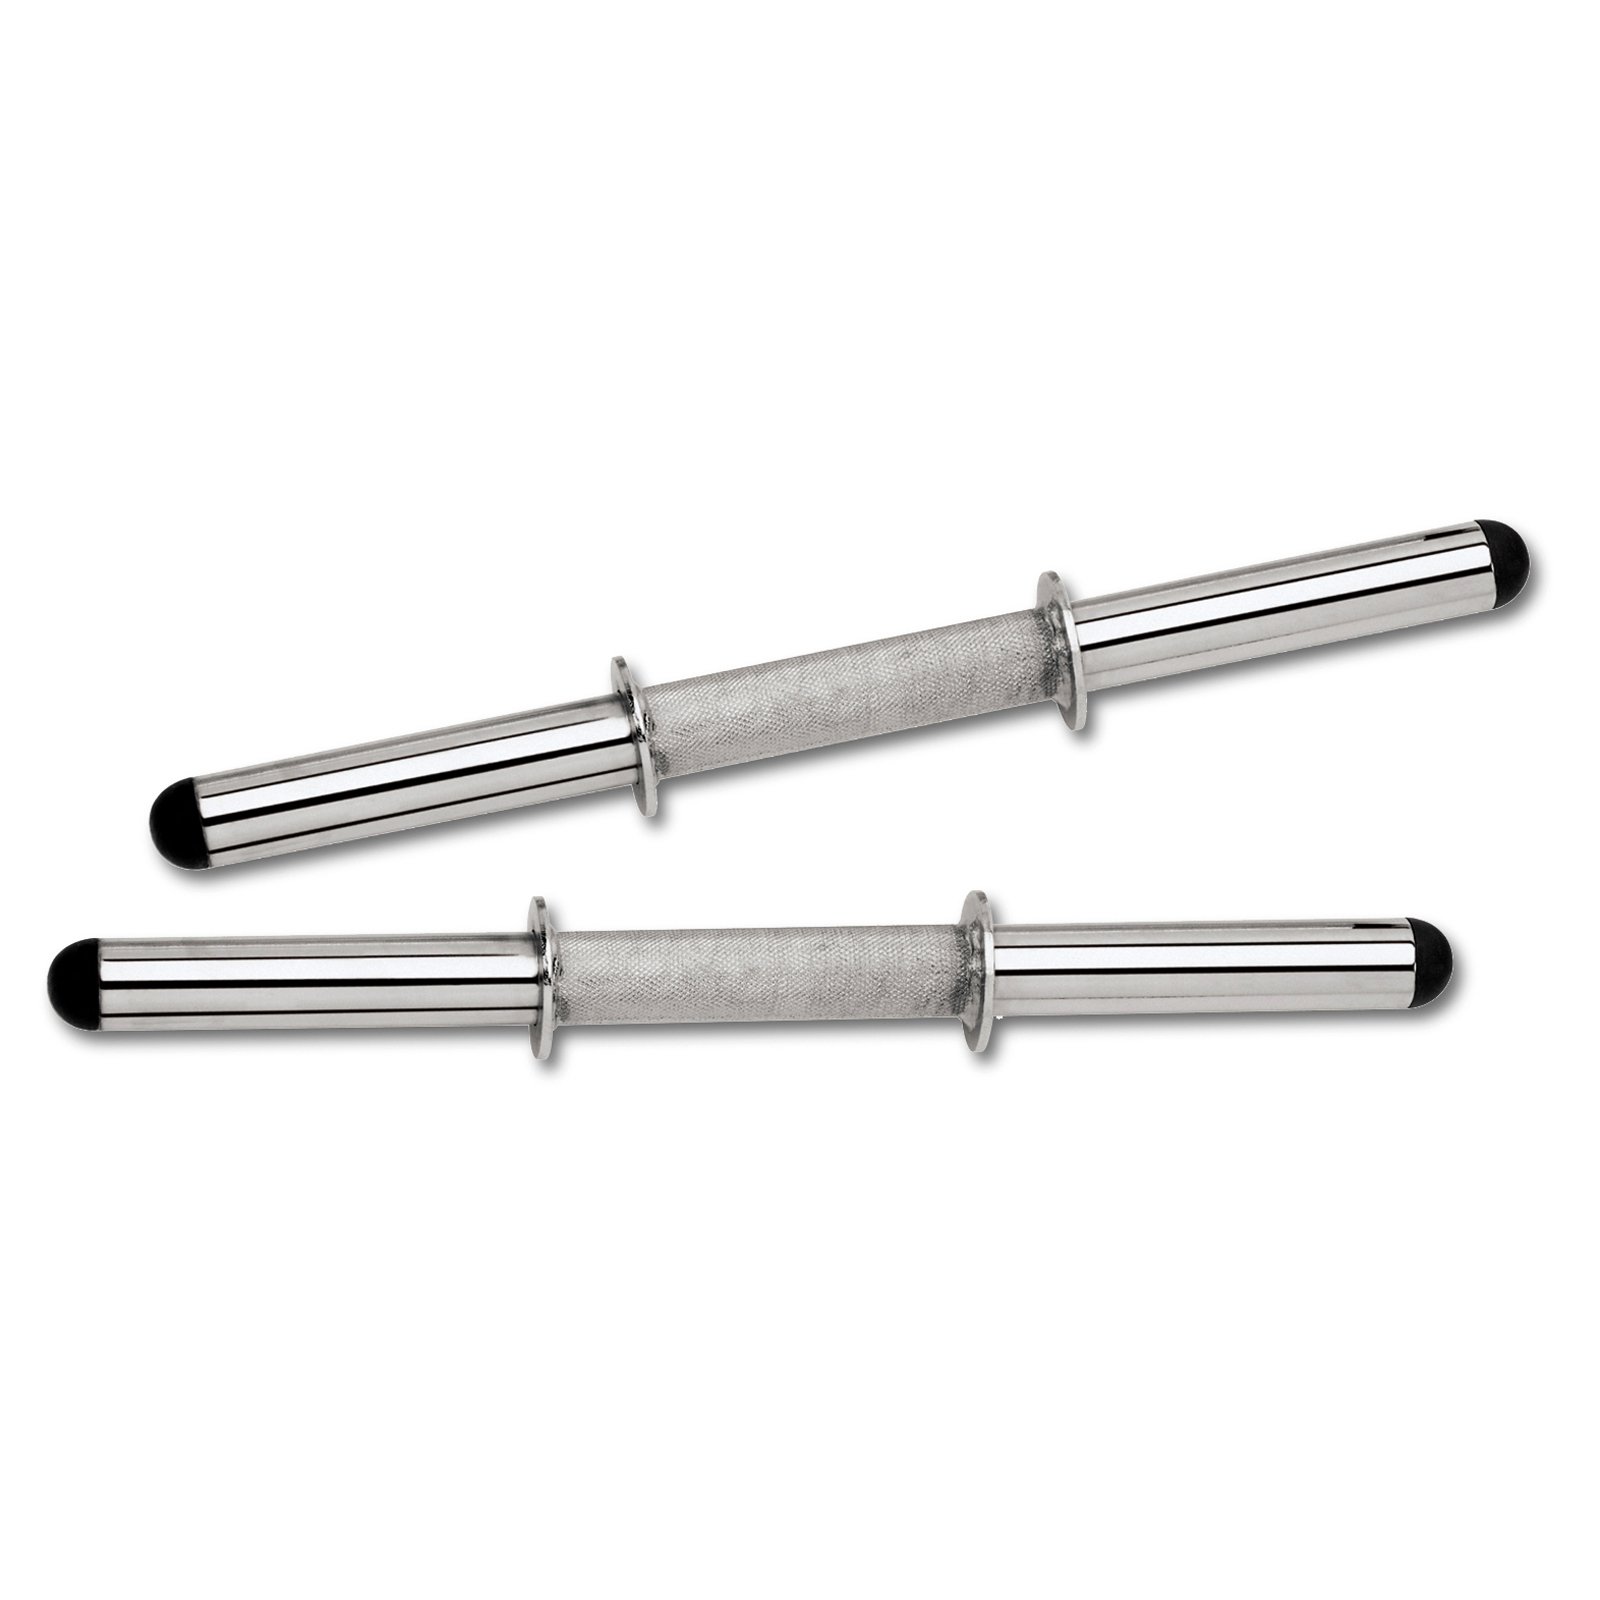 Marcy Impex Standard Curl Bar/Dumbbell Handle Combo: SDC-10.1 - image 5 of 5